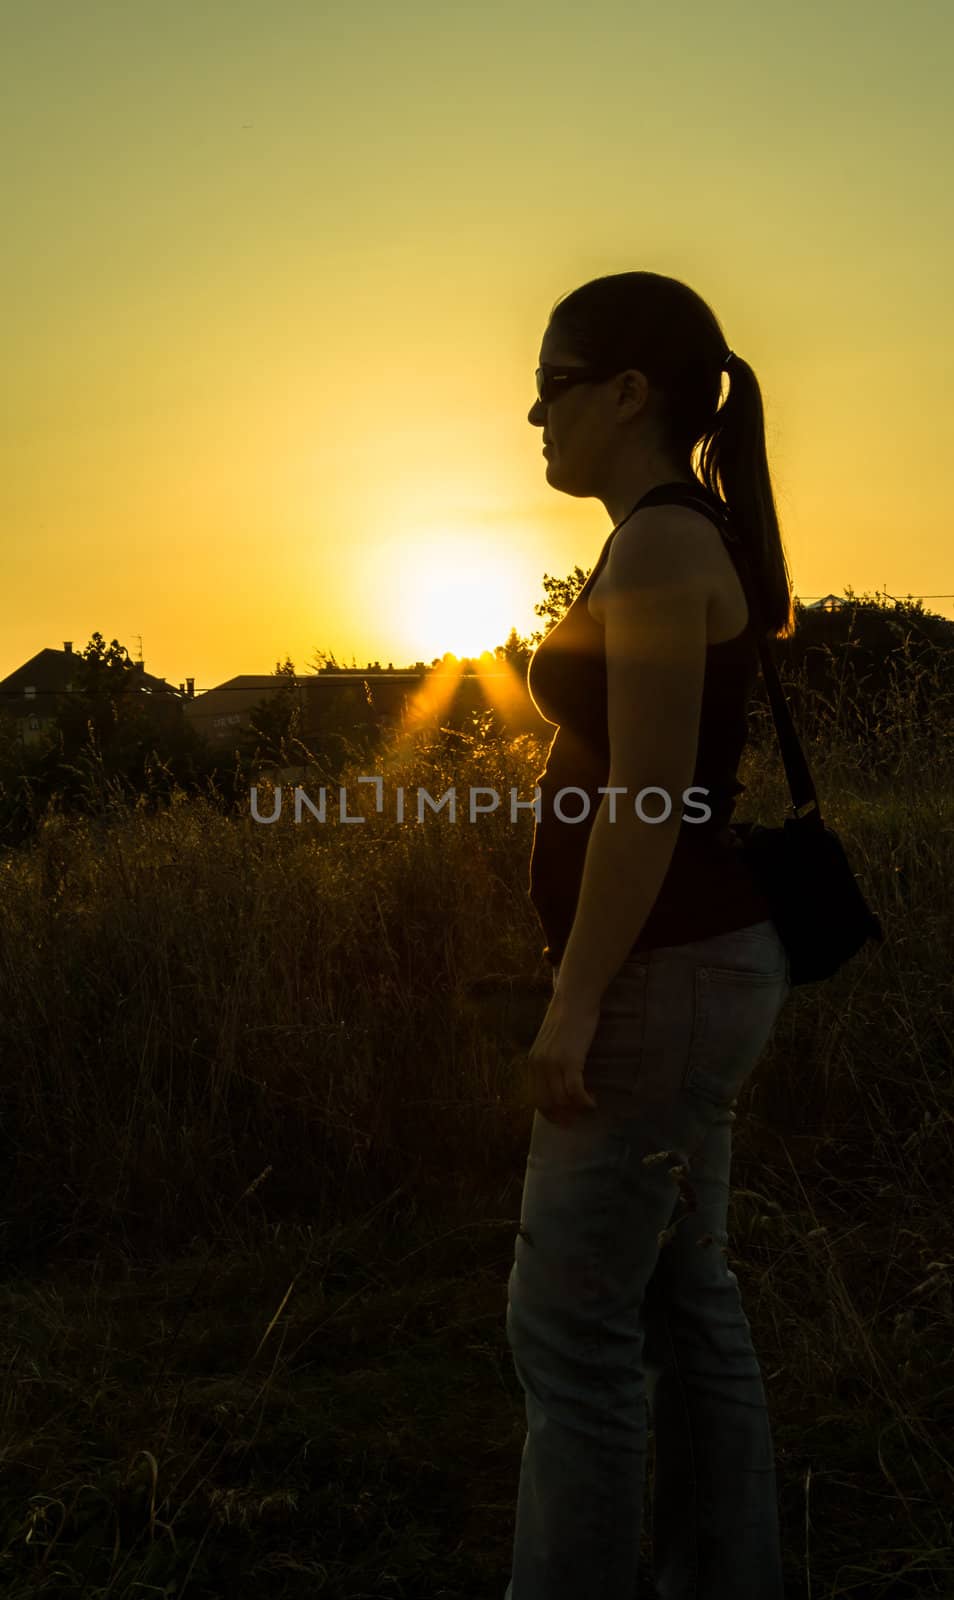 Woman sunset silhouette by doble.d